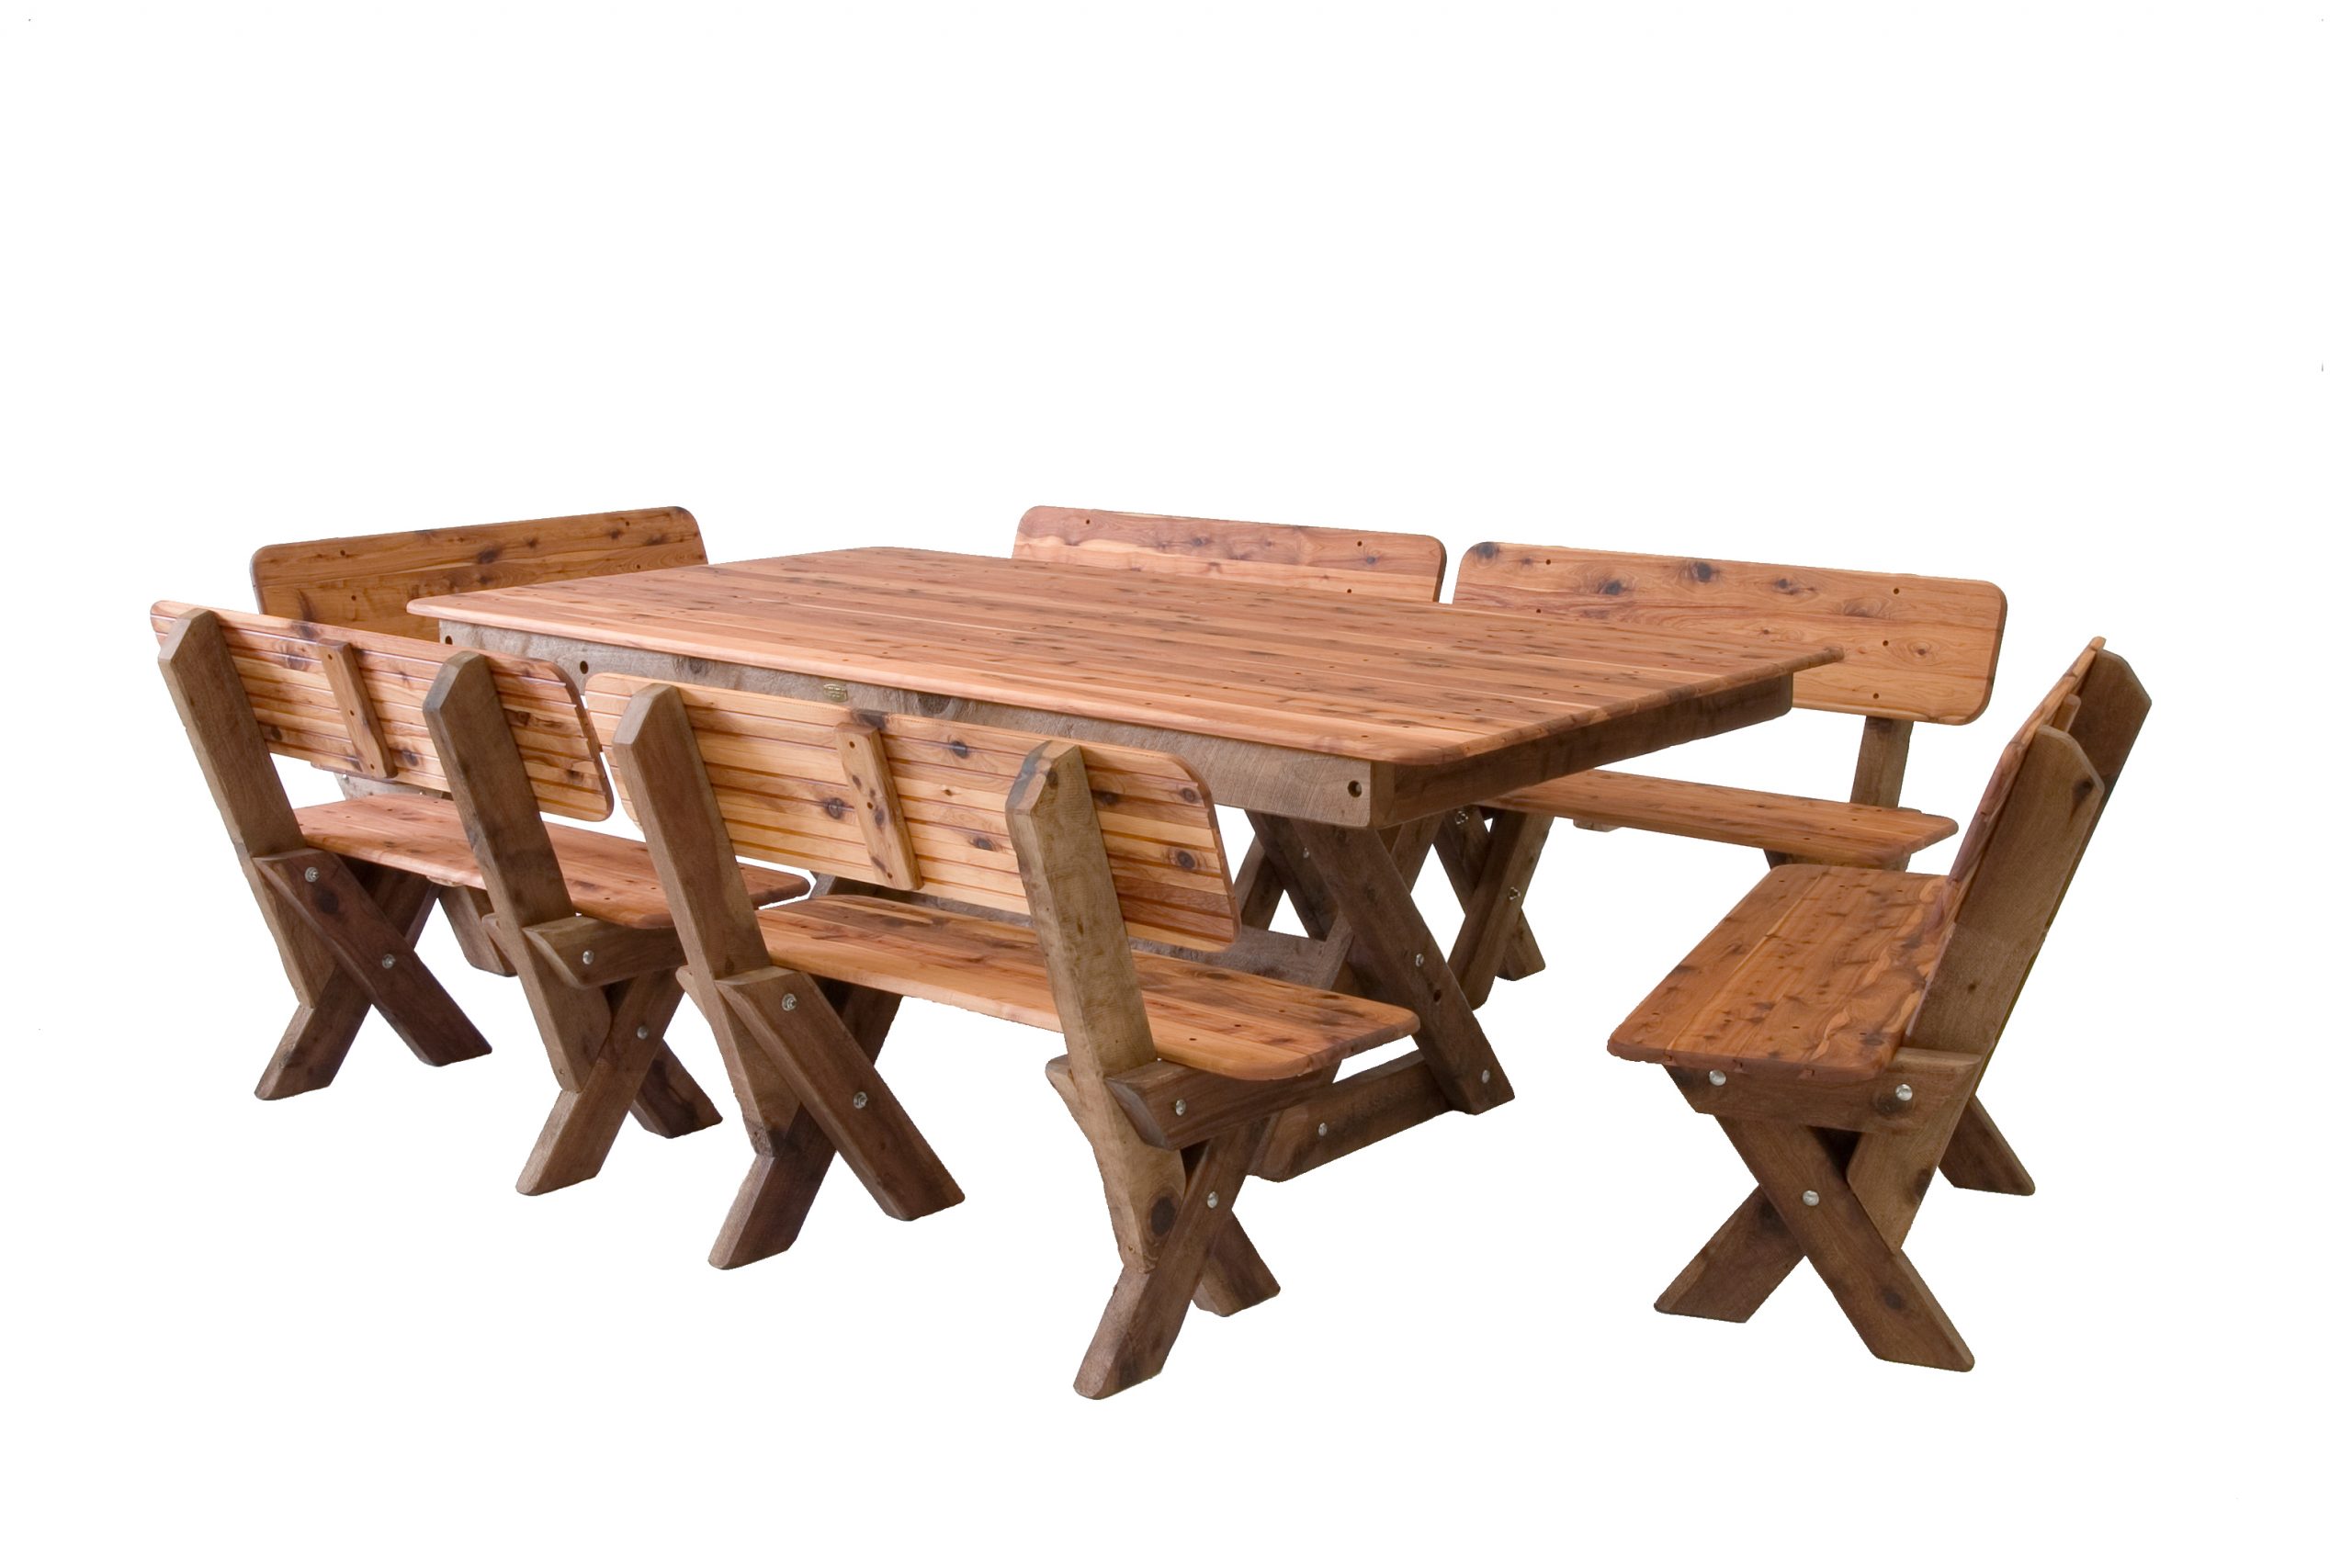 Yamba High Back Cypress Outdoor Timber Setting available to order now